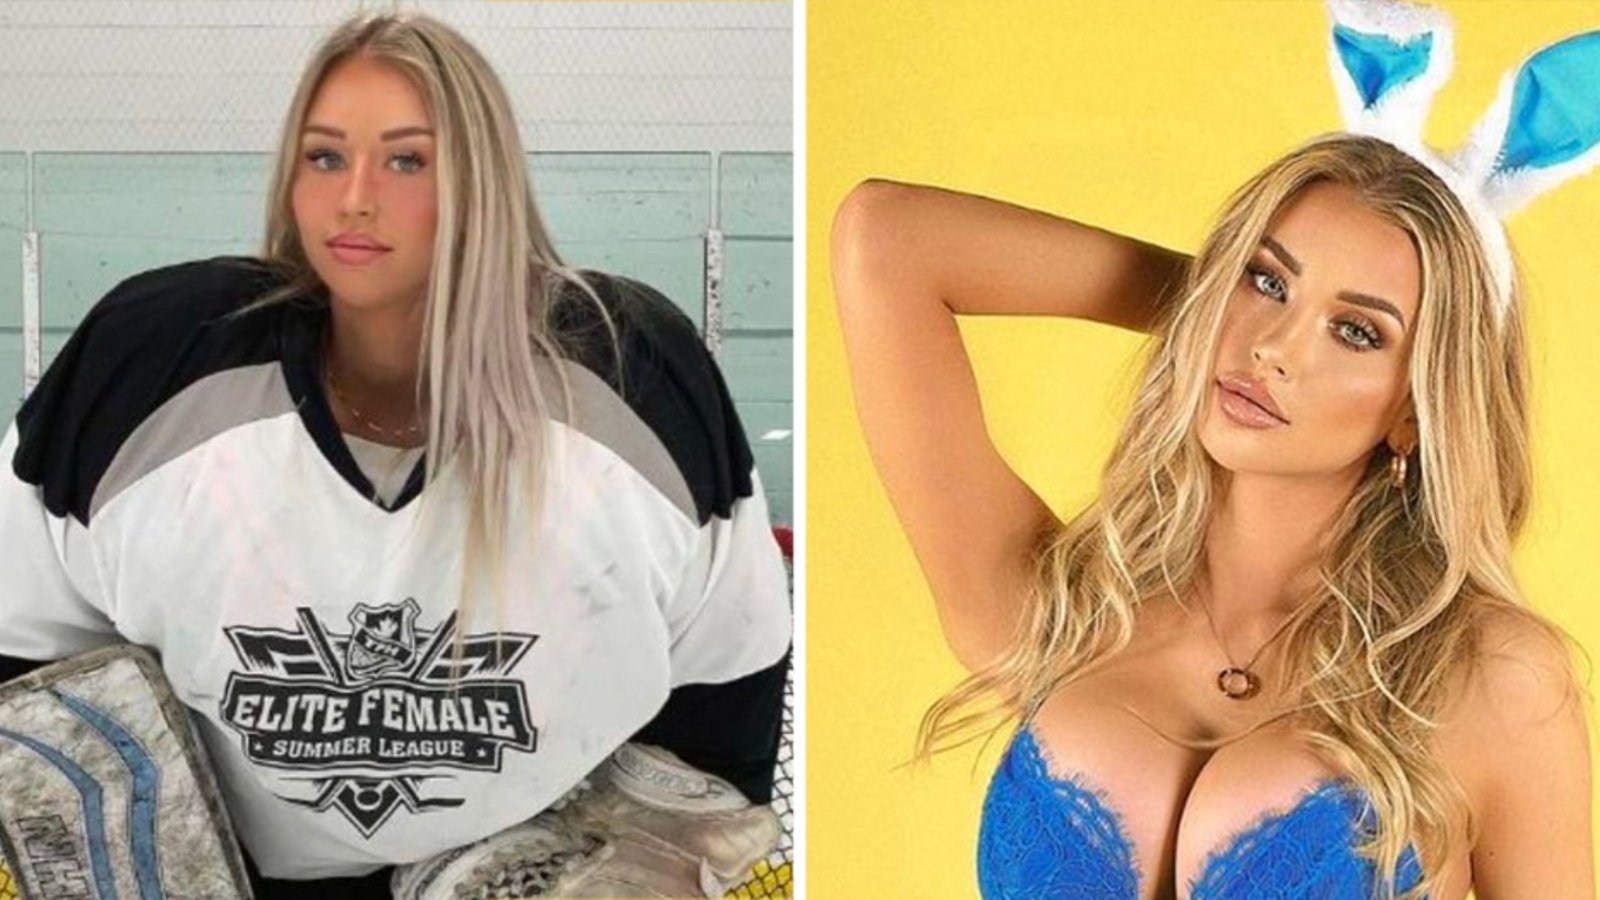 Goalie turned model Mikayla Demaiter heats up Instagram with Easter bunny photo